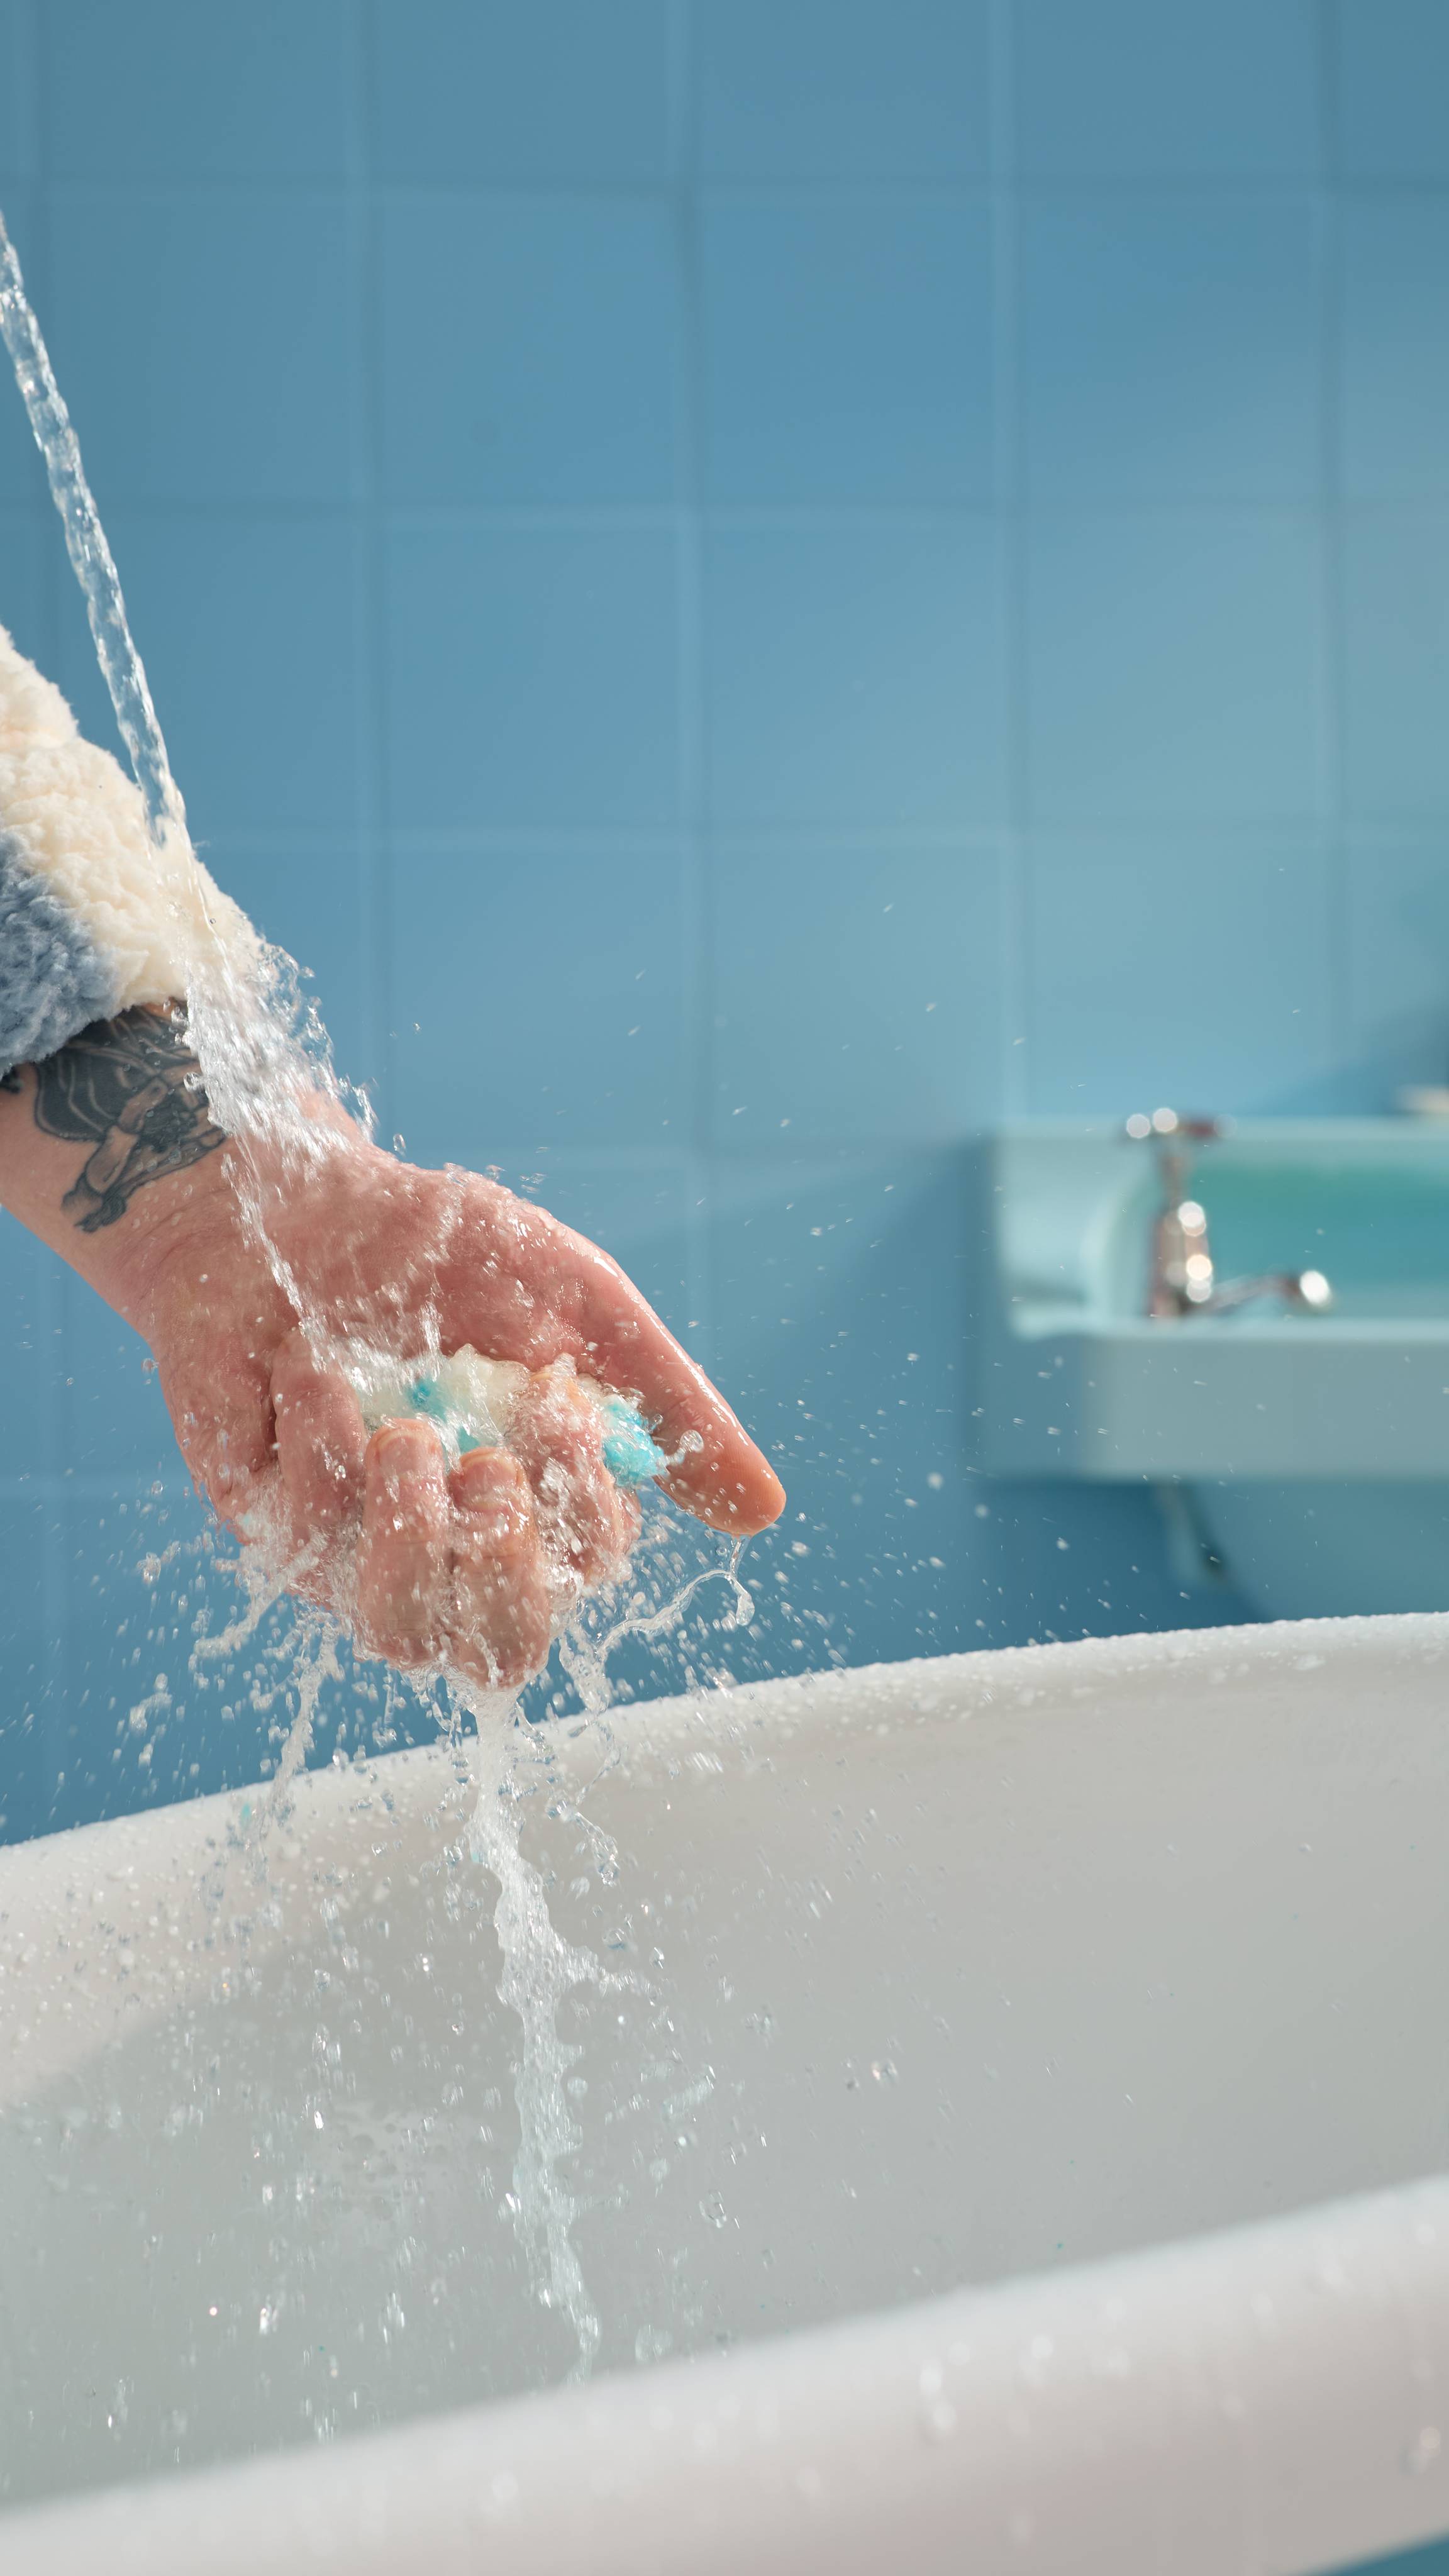 The image shows the model's hand over a bath tub holding the Seaside bath bomb as water splashes everywhere in a blue, tiled bathroom. 